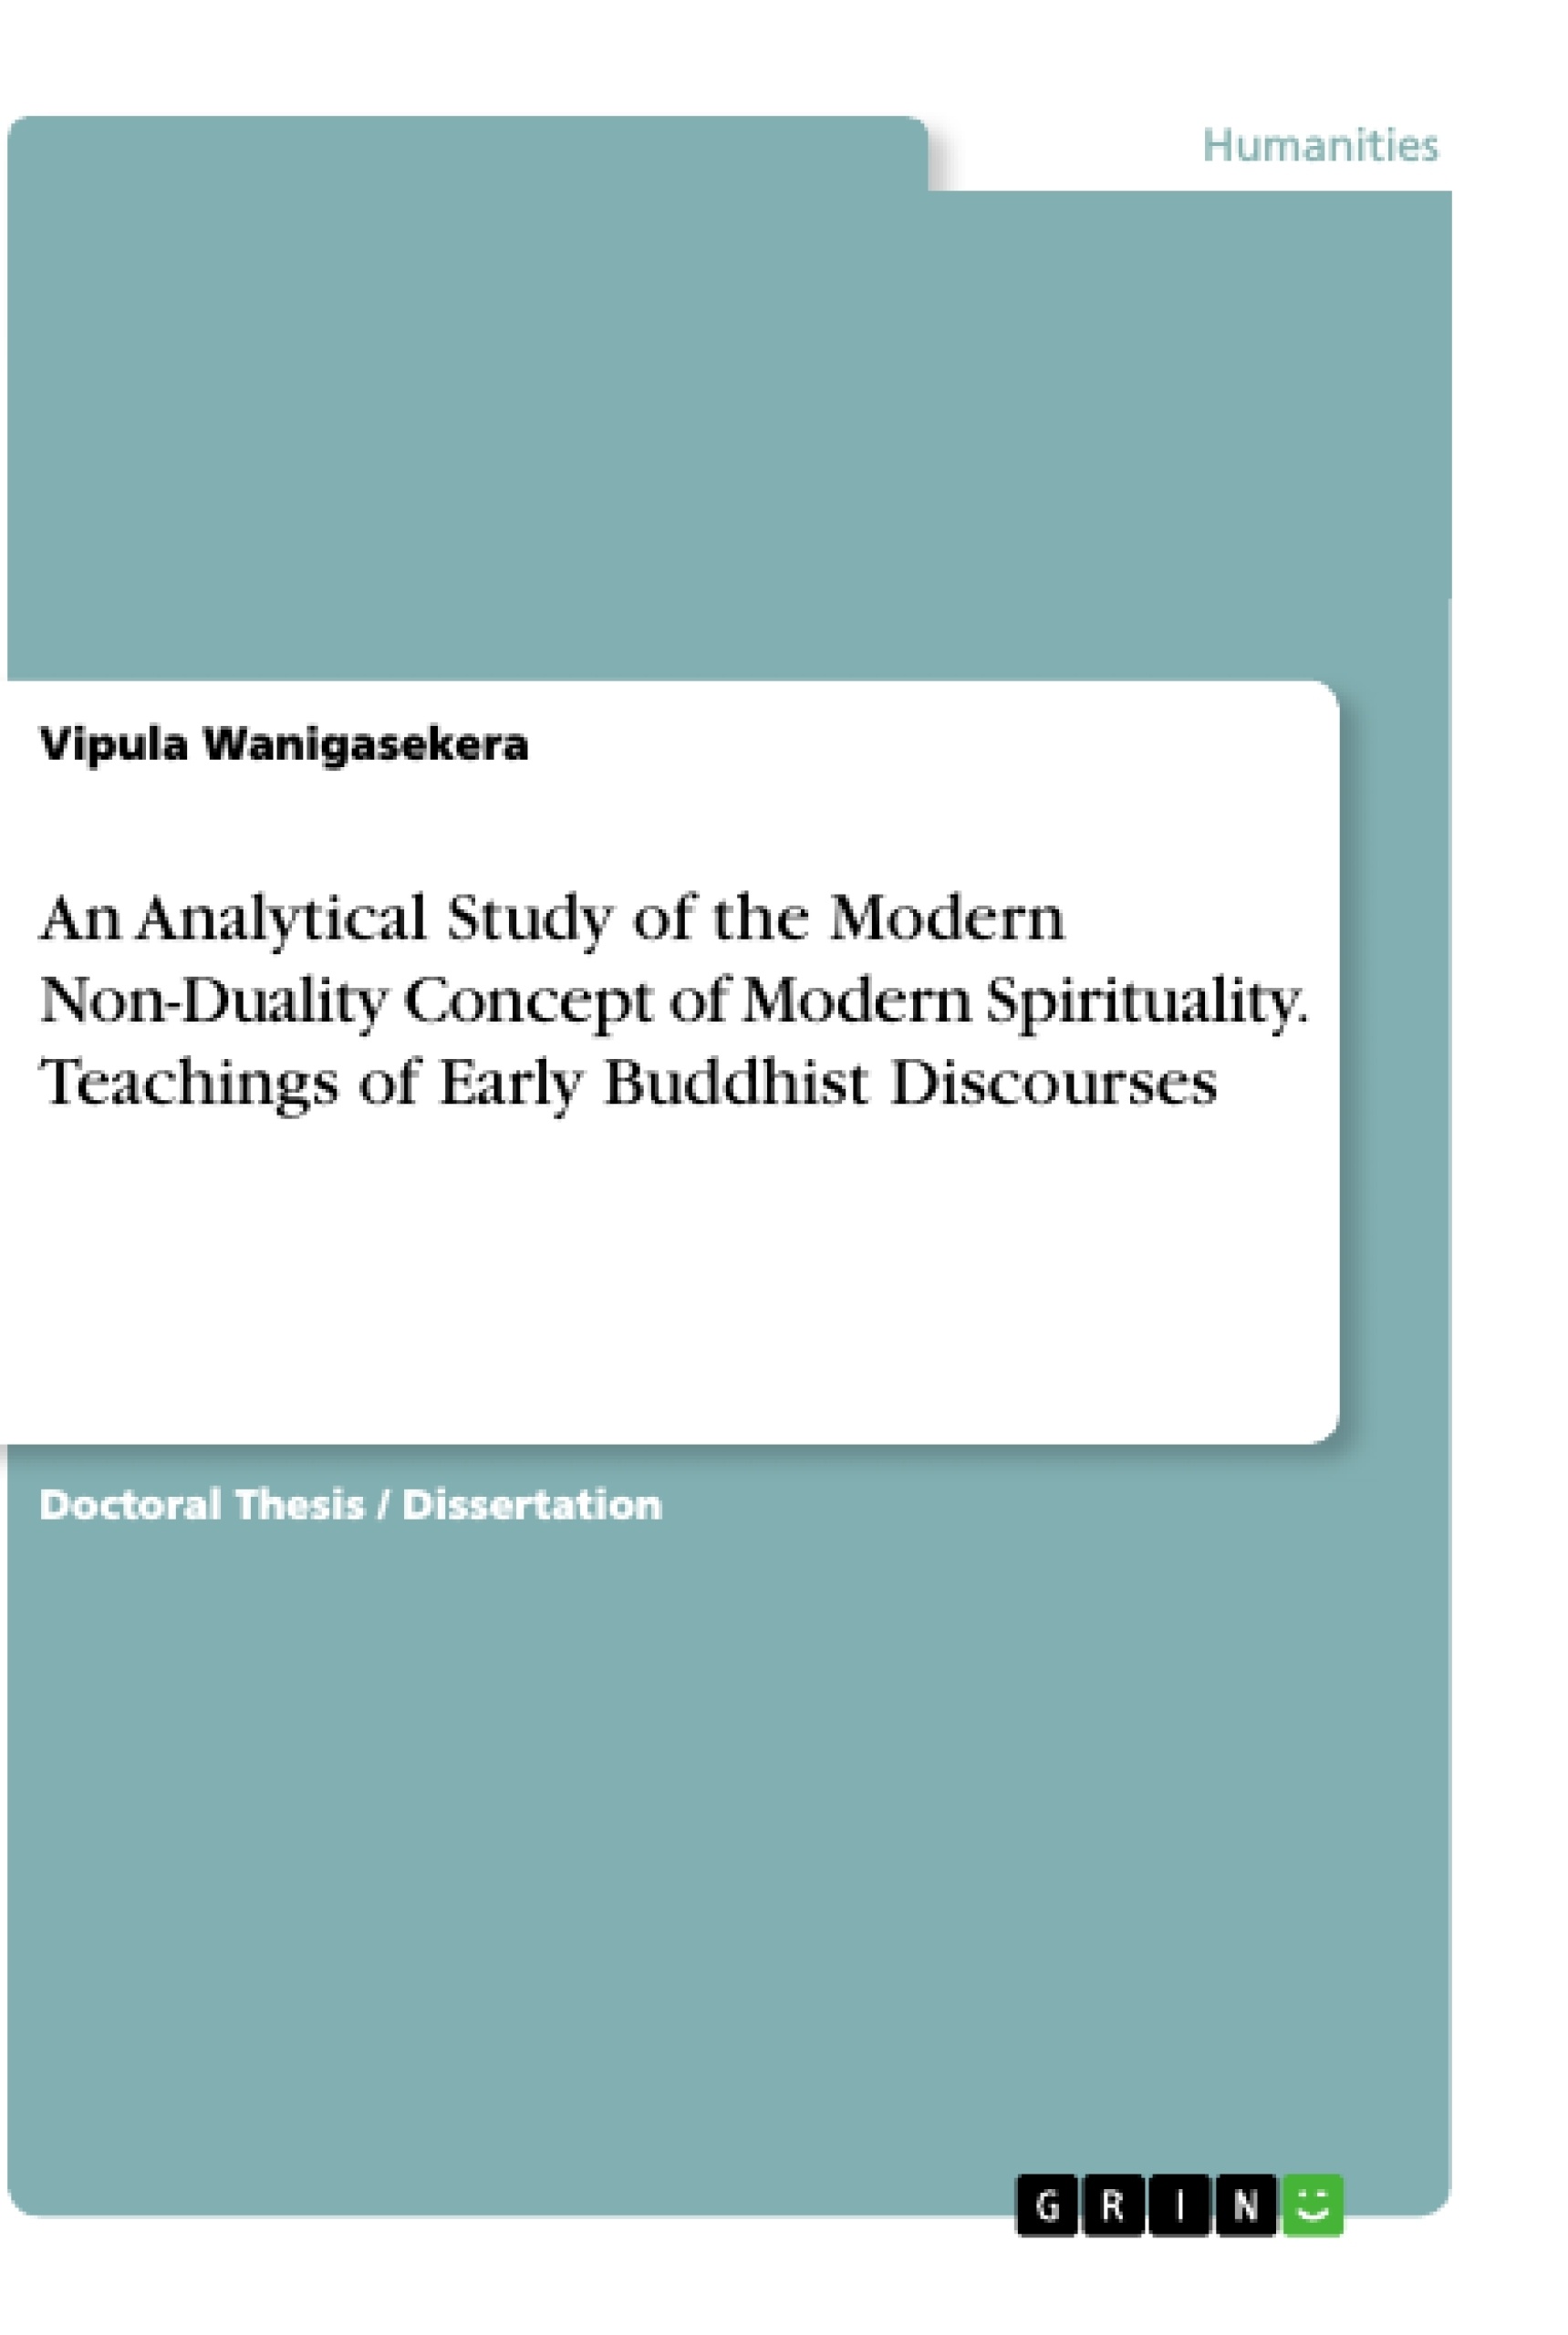 Spirituality.　of　Teachings　Early　Modern　An　Buddhist　Non-Duality　Analytical　Study　Modern　of　GRIN　the　Concept　of　Discourses